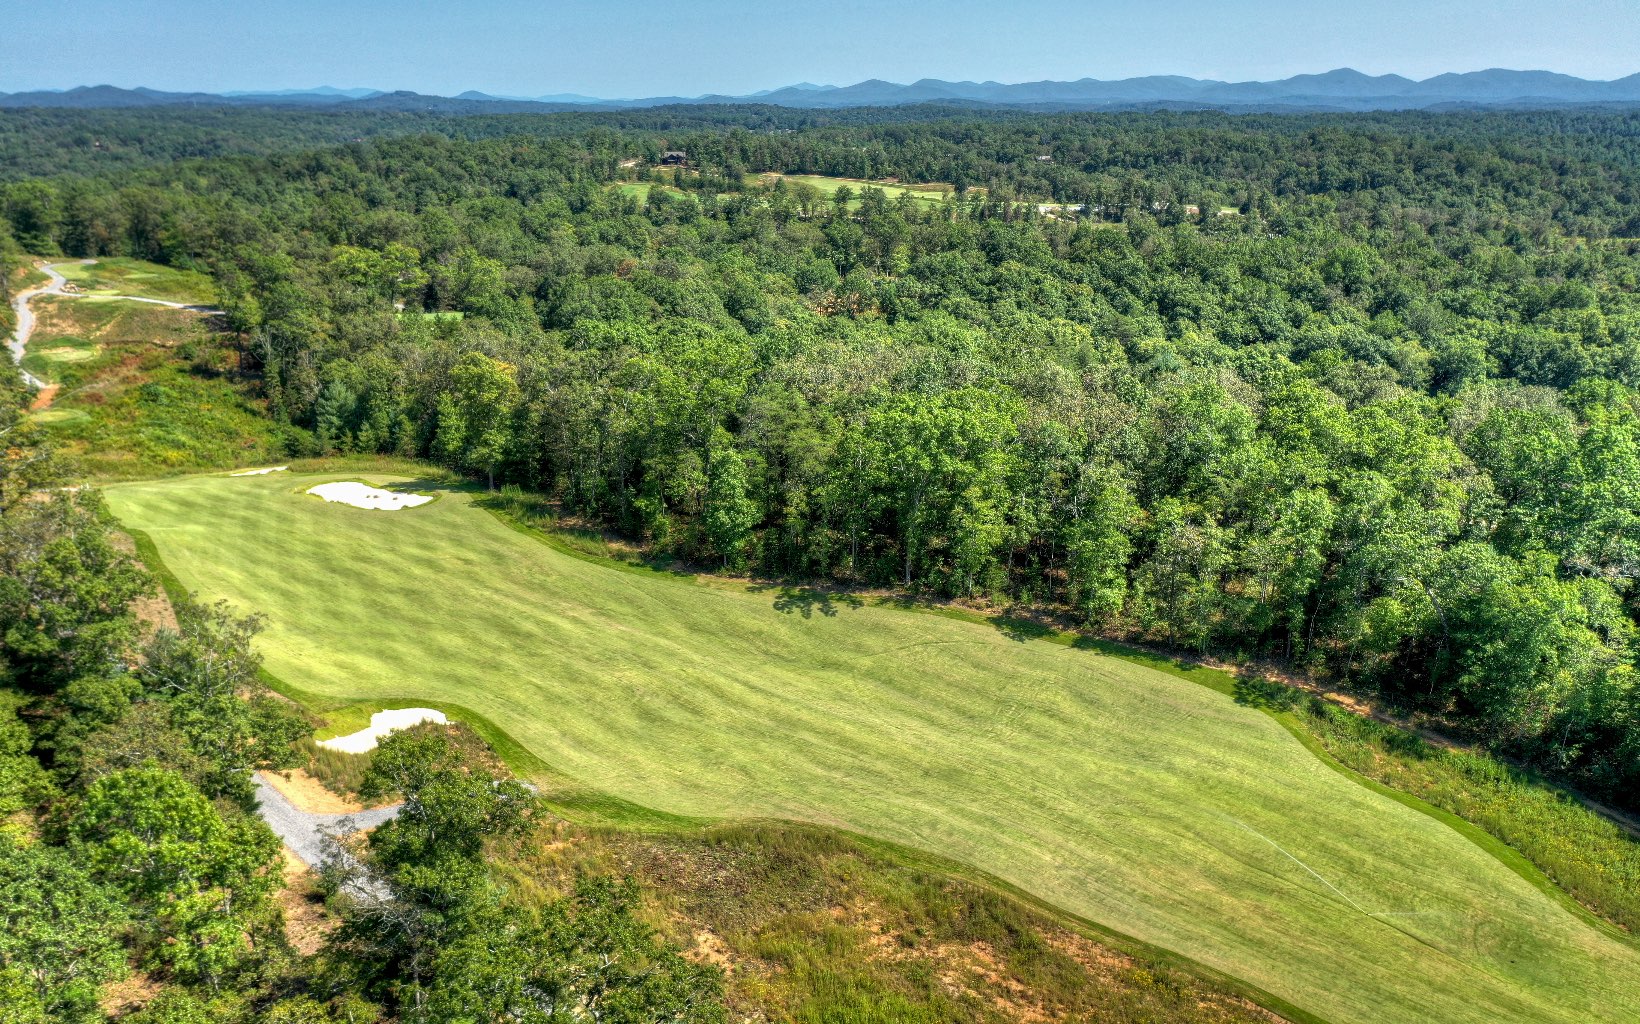 Be home on the fairway of Old Toccoa Farm, the most illustrious golf course in North Georgia. Lot 142 is one of the most premier lots in this Golf Digest award nominated community. Enjoy beautiful brunches and exclusive wine dinners for members only at the newly built clubhouse and restaurant, or play a round of golf alongside the Toccoa River. This homesite offers 4,000 feet of deeded river access, all underground utilities, high speed internet, paved roads, and 24 hour guarded gate. With custom home plans already available—saving months of planning—this lot is ready to build your dream home in the most well designed lifestyle communities in Blue Ridge. We have also designed a pet-friendly side yard for every member of your family! This is the hole-in-one you’ve been dreaming about. For video, please text Listing Agent.